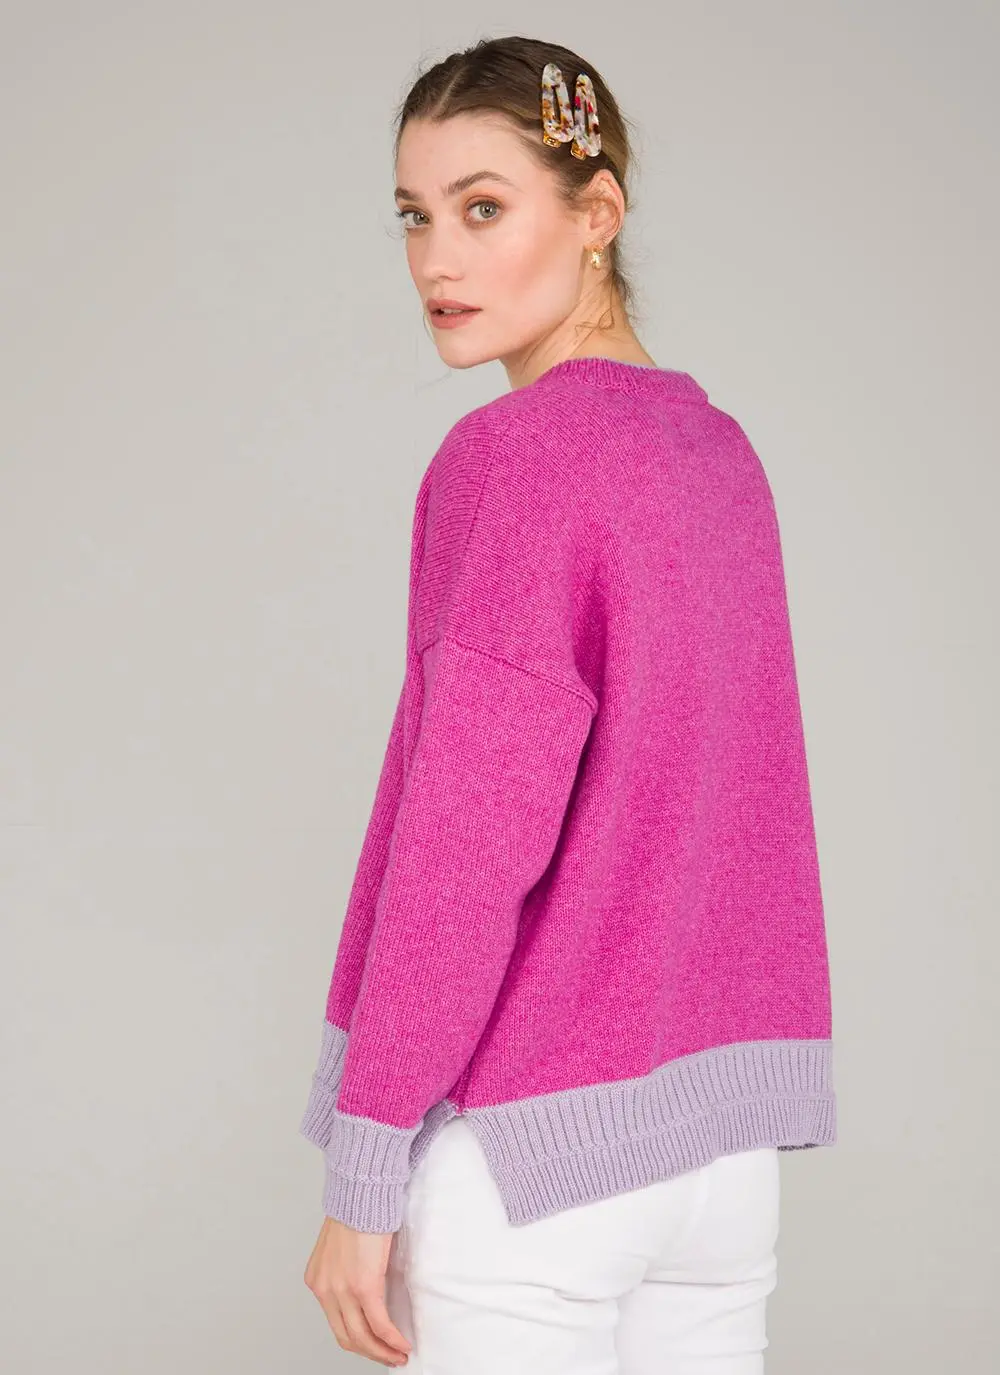 The Bright Ultra Contrast Sweater